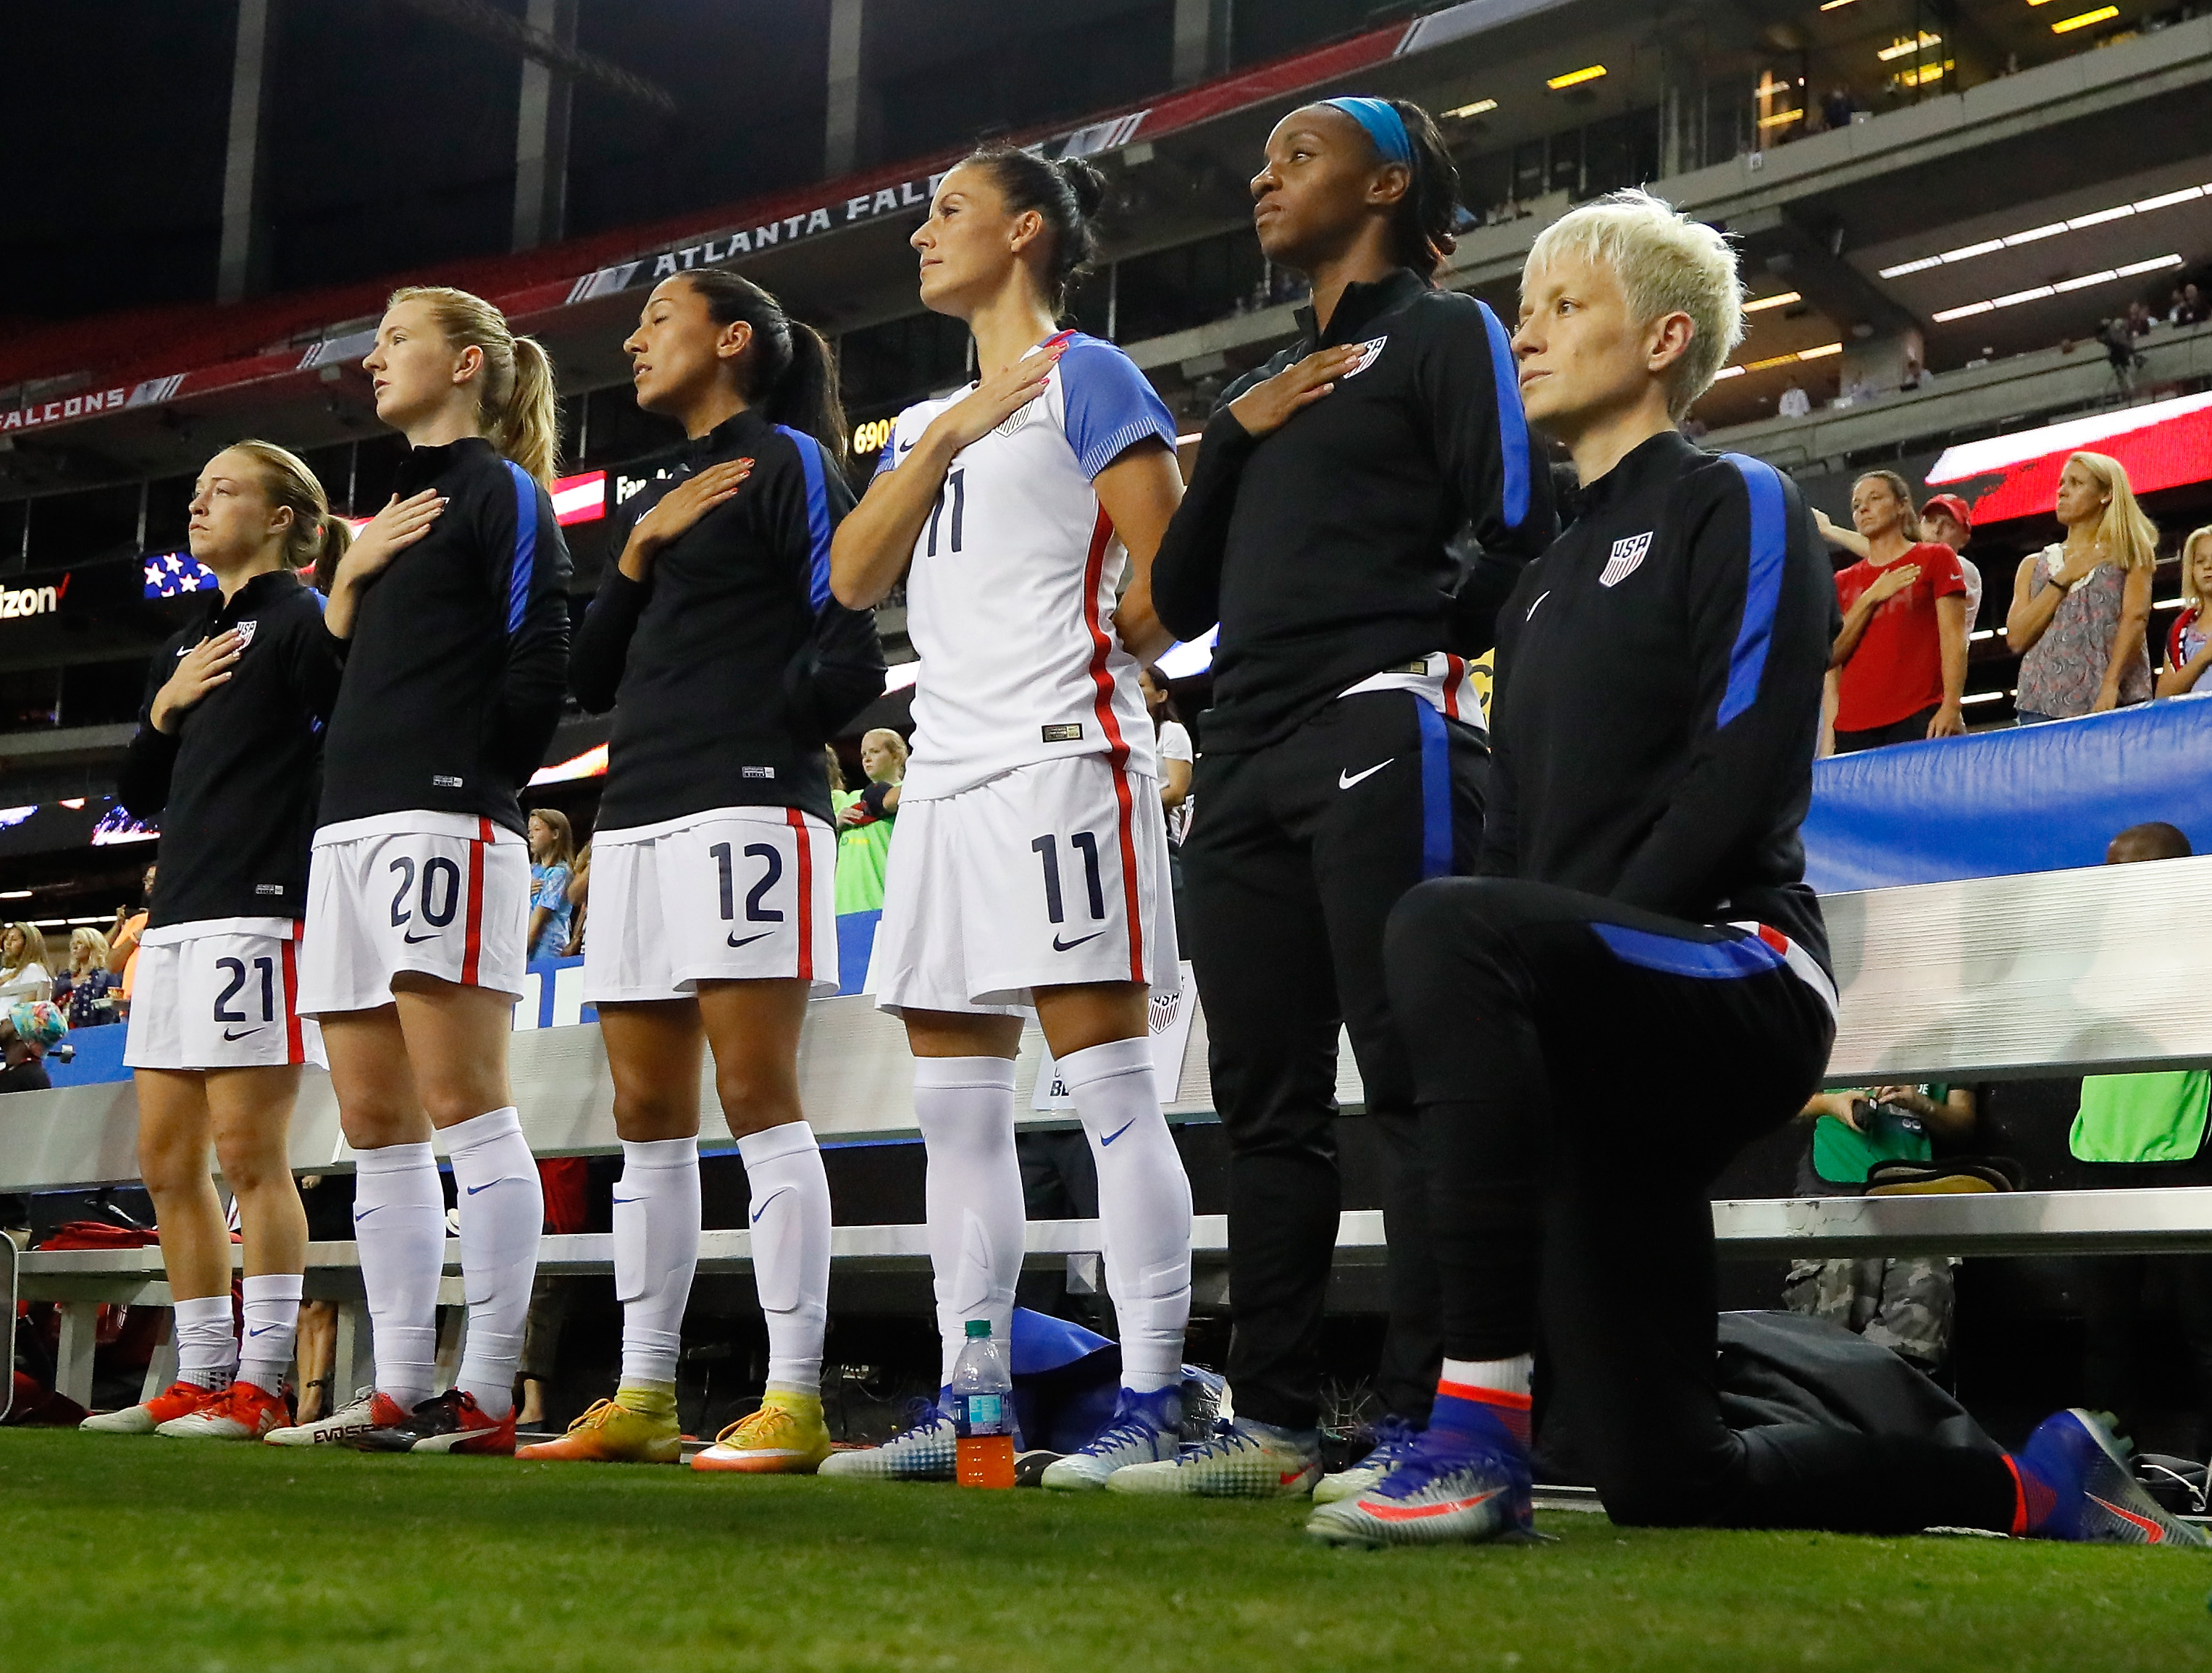 Megan Rapinoe #15 kneels during the National Anthem prior to the match between the United States and the Netherlands at Georgia Dome in 2016. (Kevin C. Cox/Getty Images)